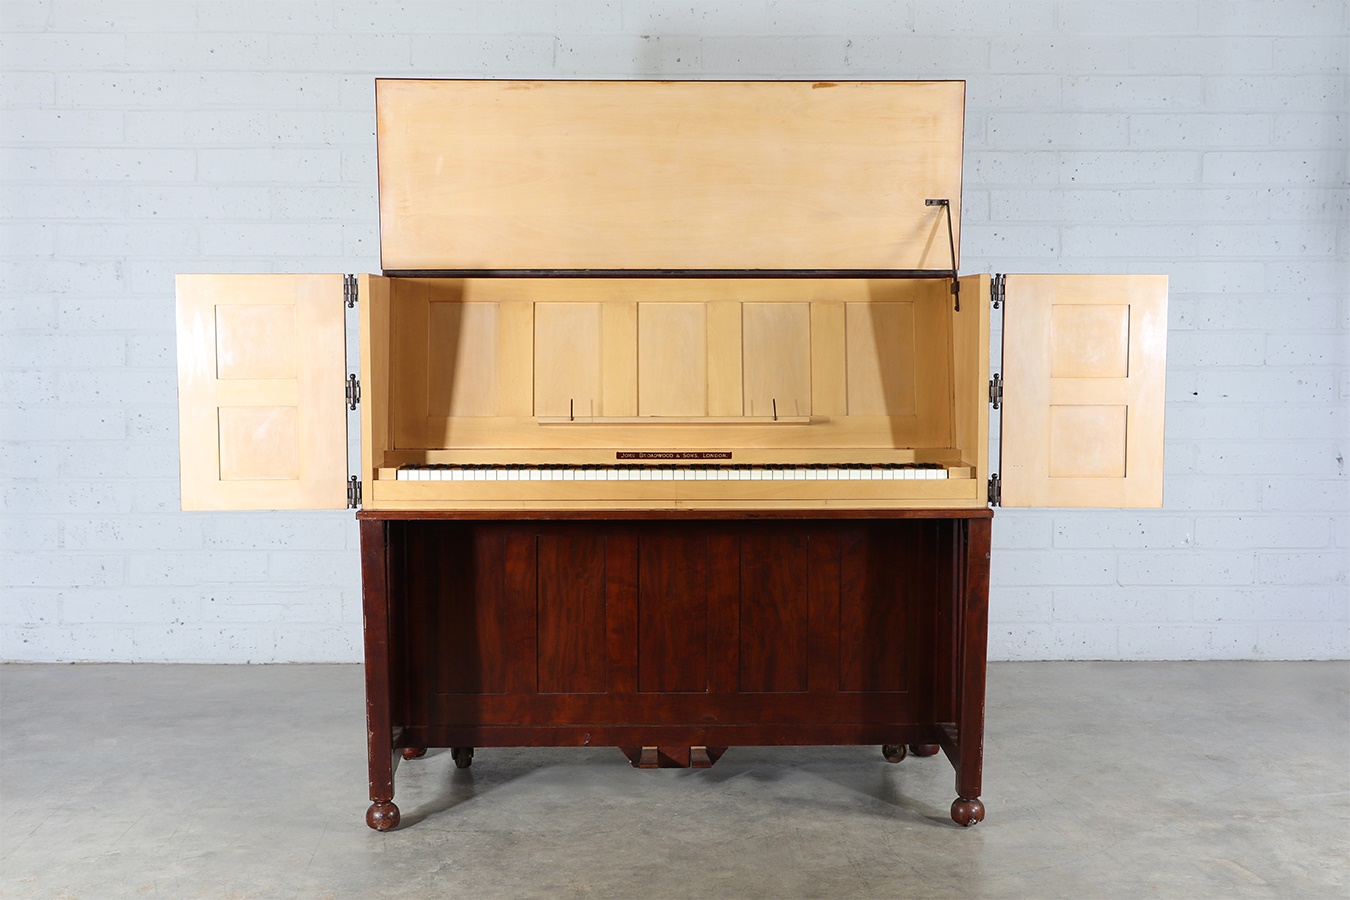 An upright Broadwood piano, as designed by Charles Robert Ashbee (1863-1942)